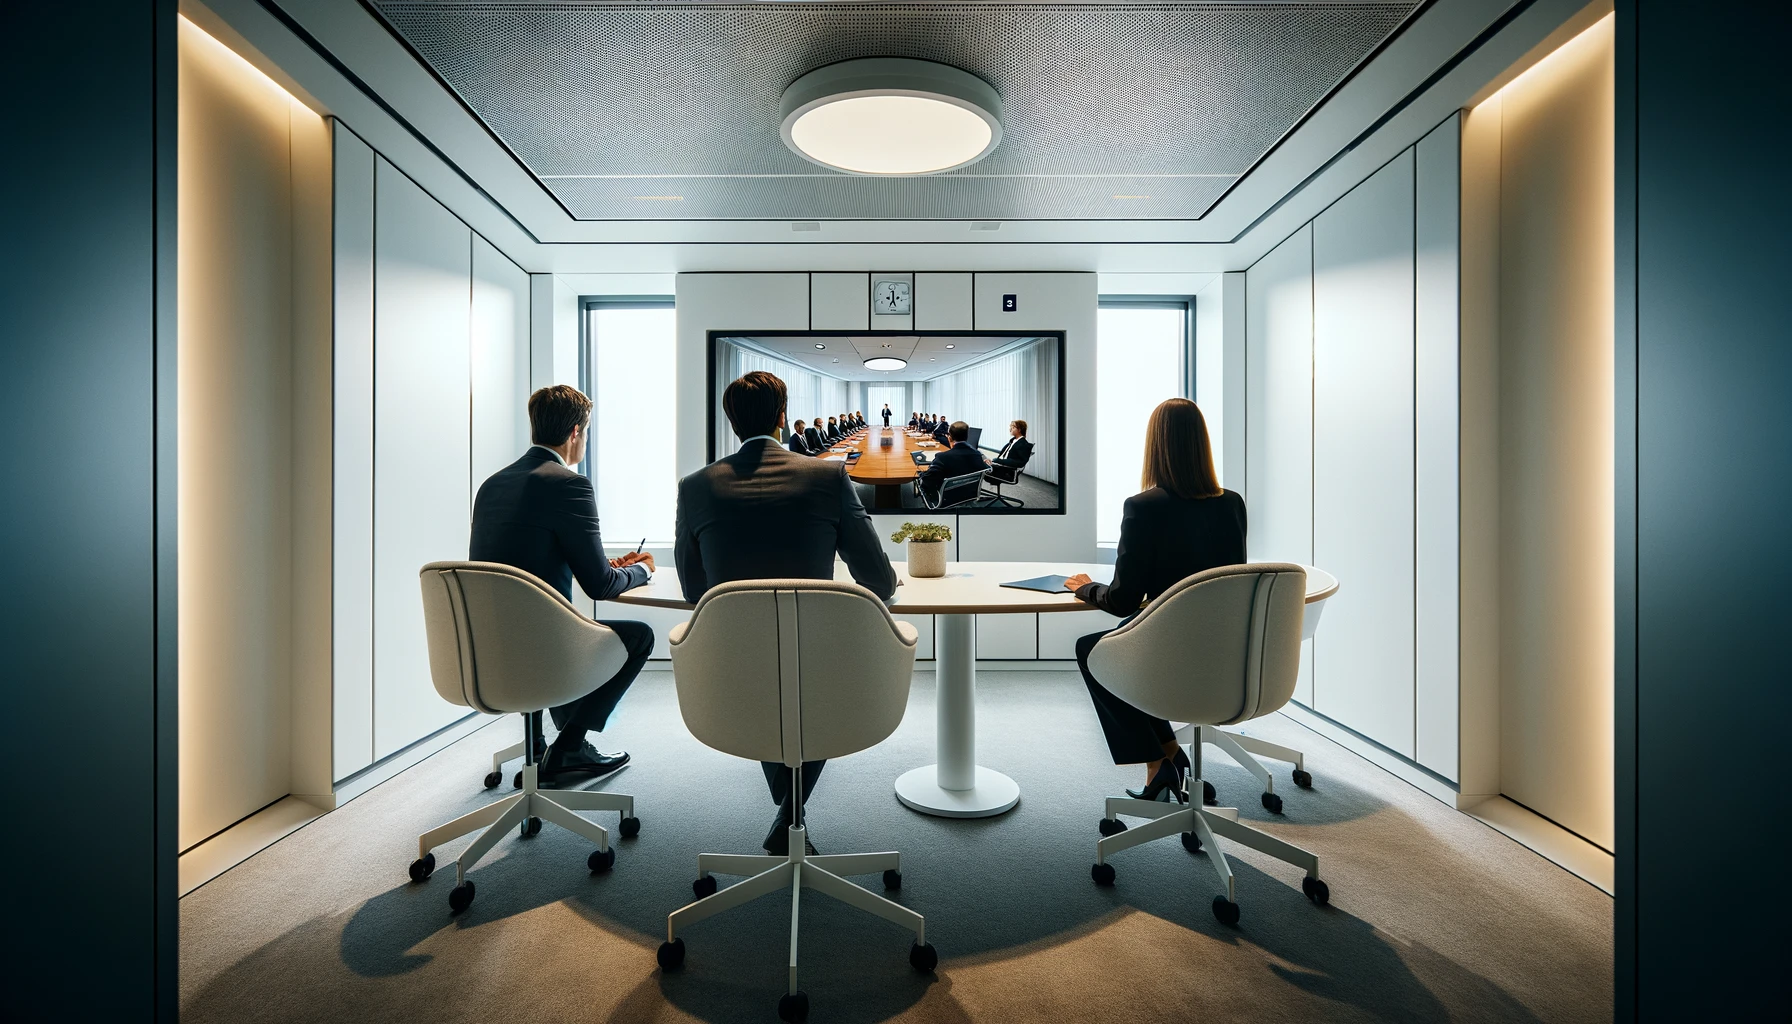 Professionals in a modern meeting room viewing AI market research analytics on a screen.